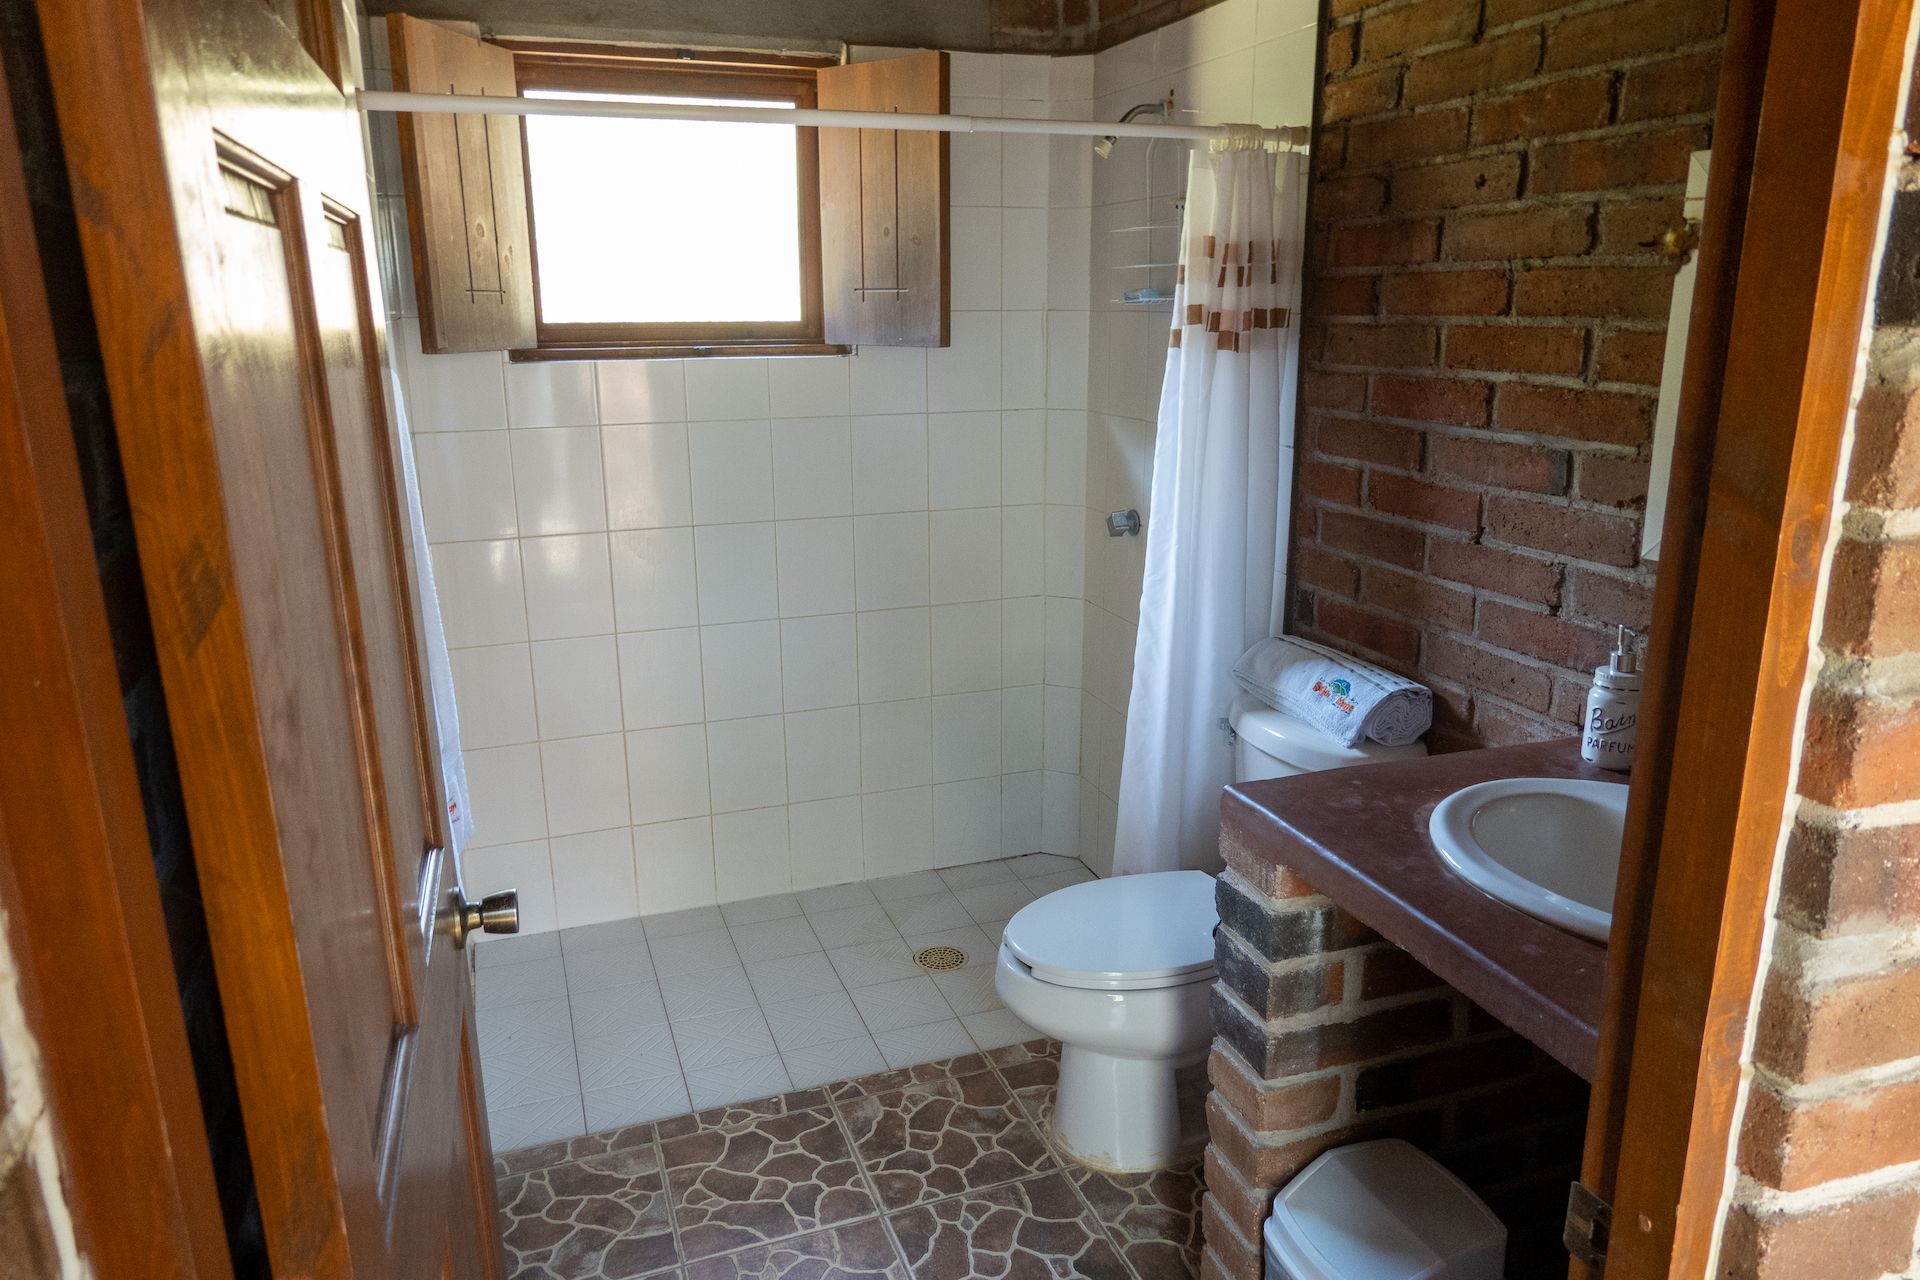 A private and clean bathroom: Yay!